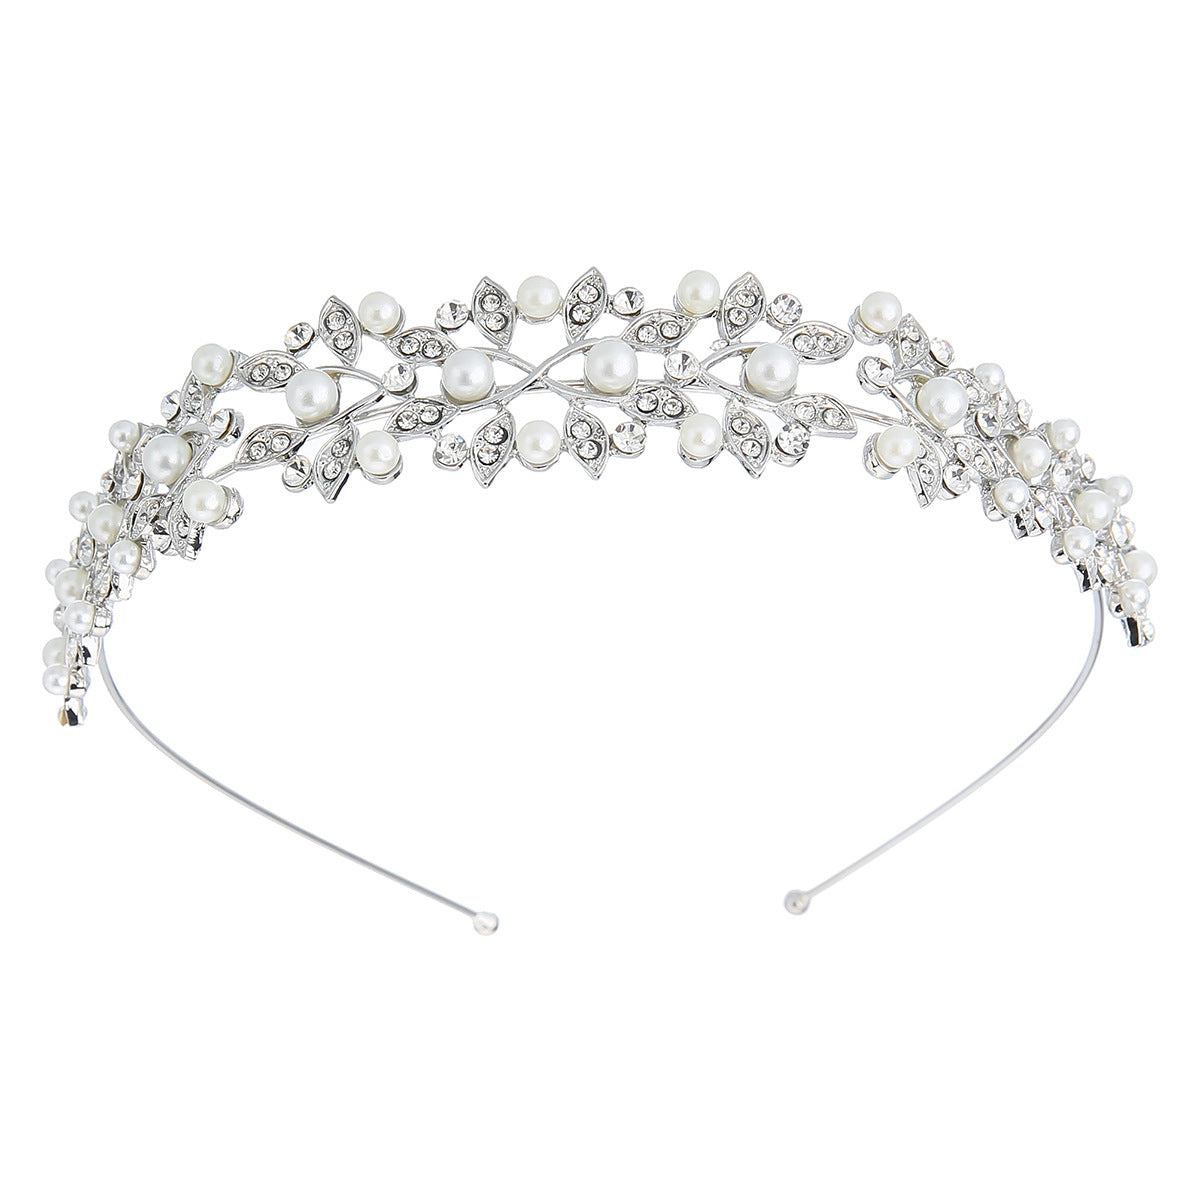 234199412 Delicate Pearl and Leaf Headband for a Romantic Wedding Day Look